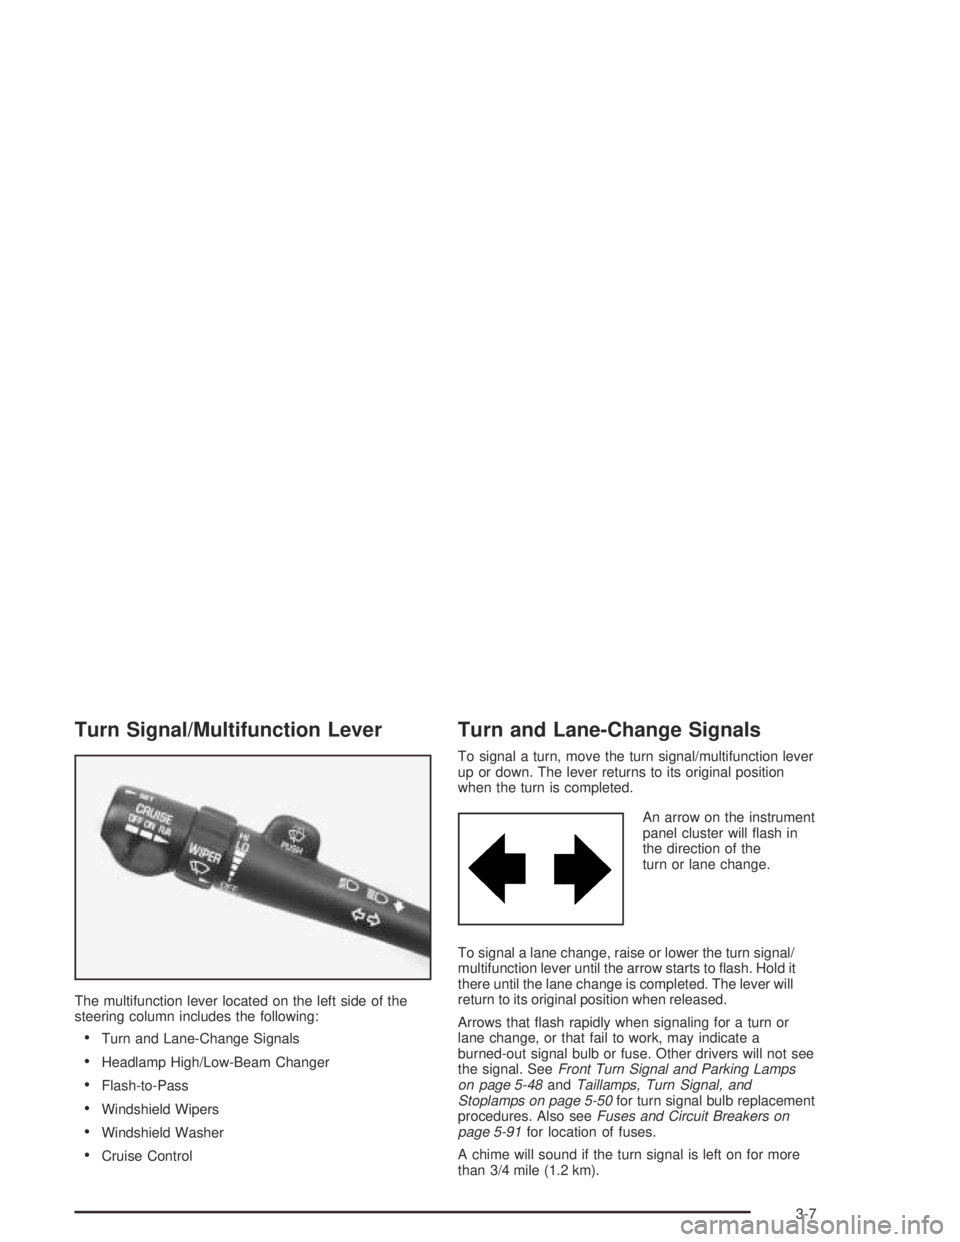 BUICK CENTURY 2005  Owners Manual Turn Signal/Multifunction Lever
The multifunction lever located on the left side of the
steering column includes the following:
Turn and Lane-Change Signals
Headlamp High/Low-Beam Changer
Flash-to-